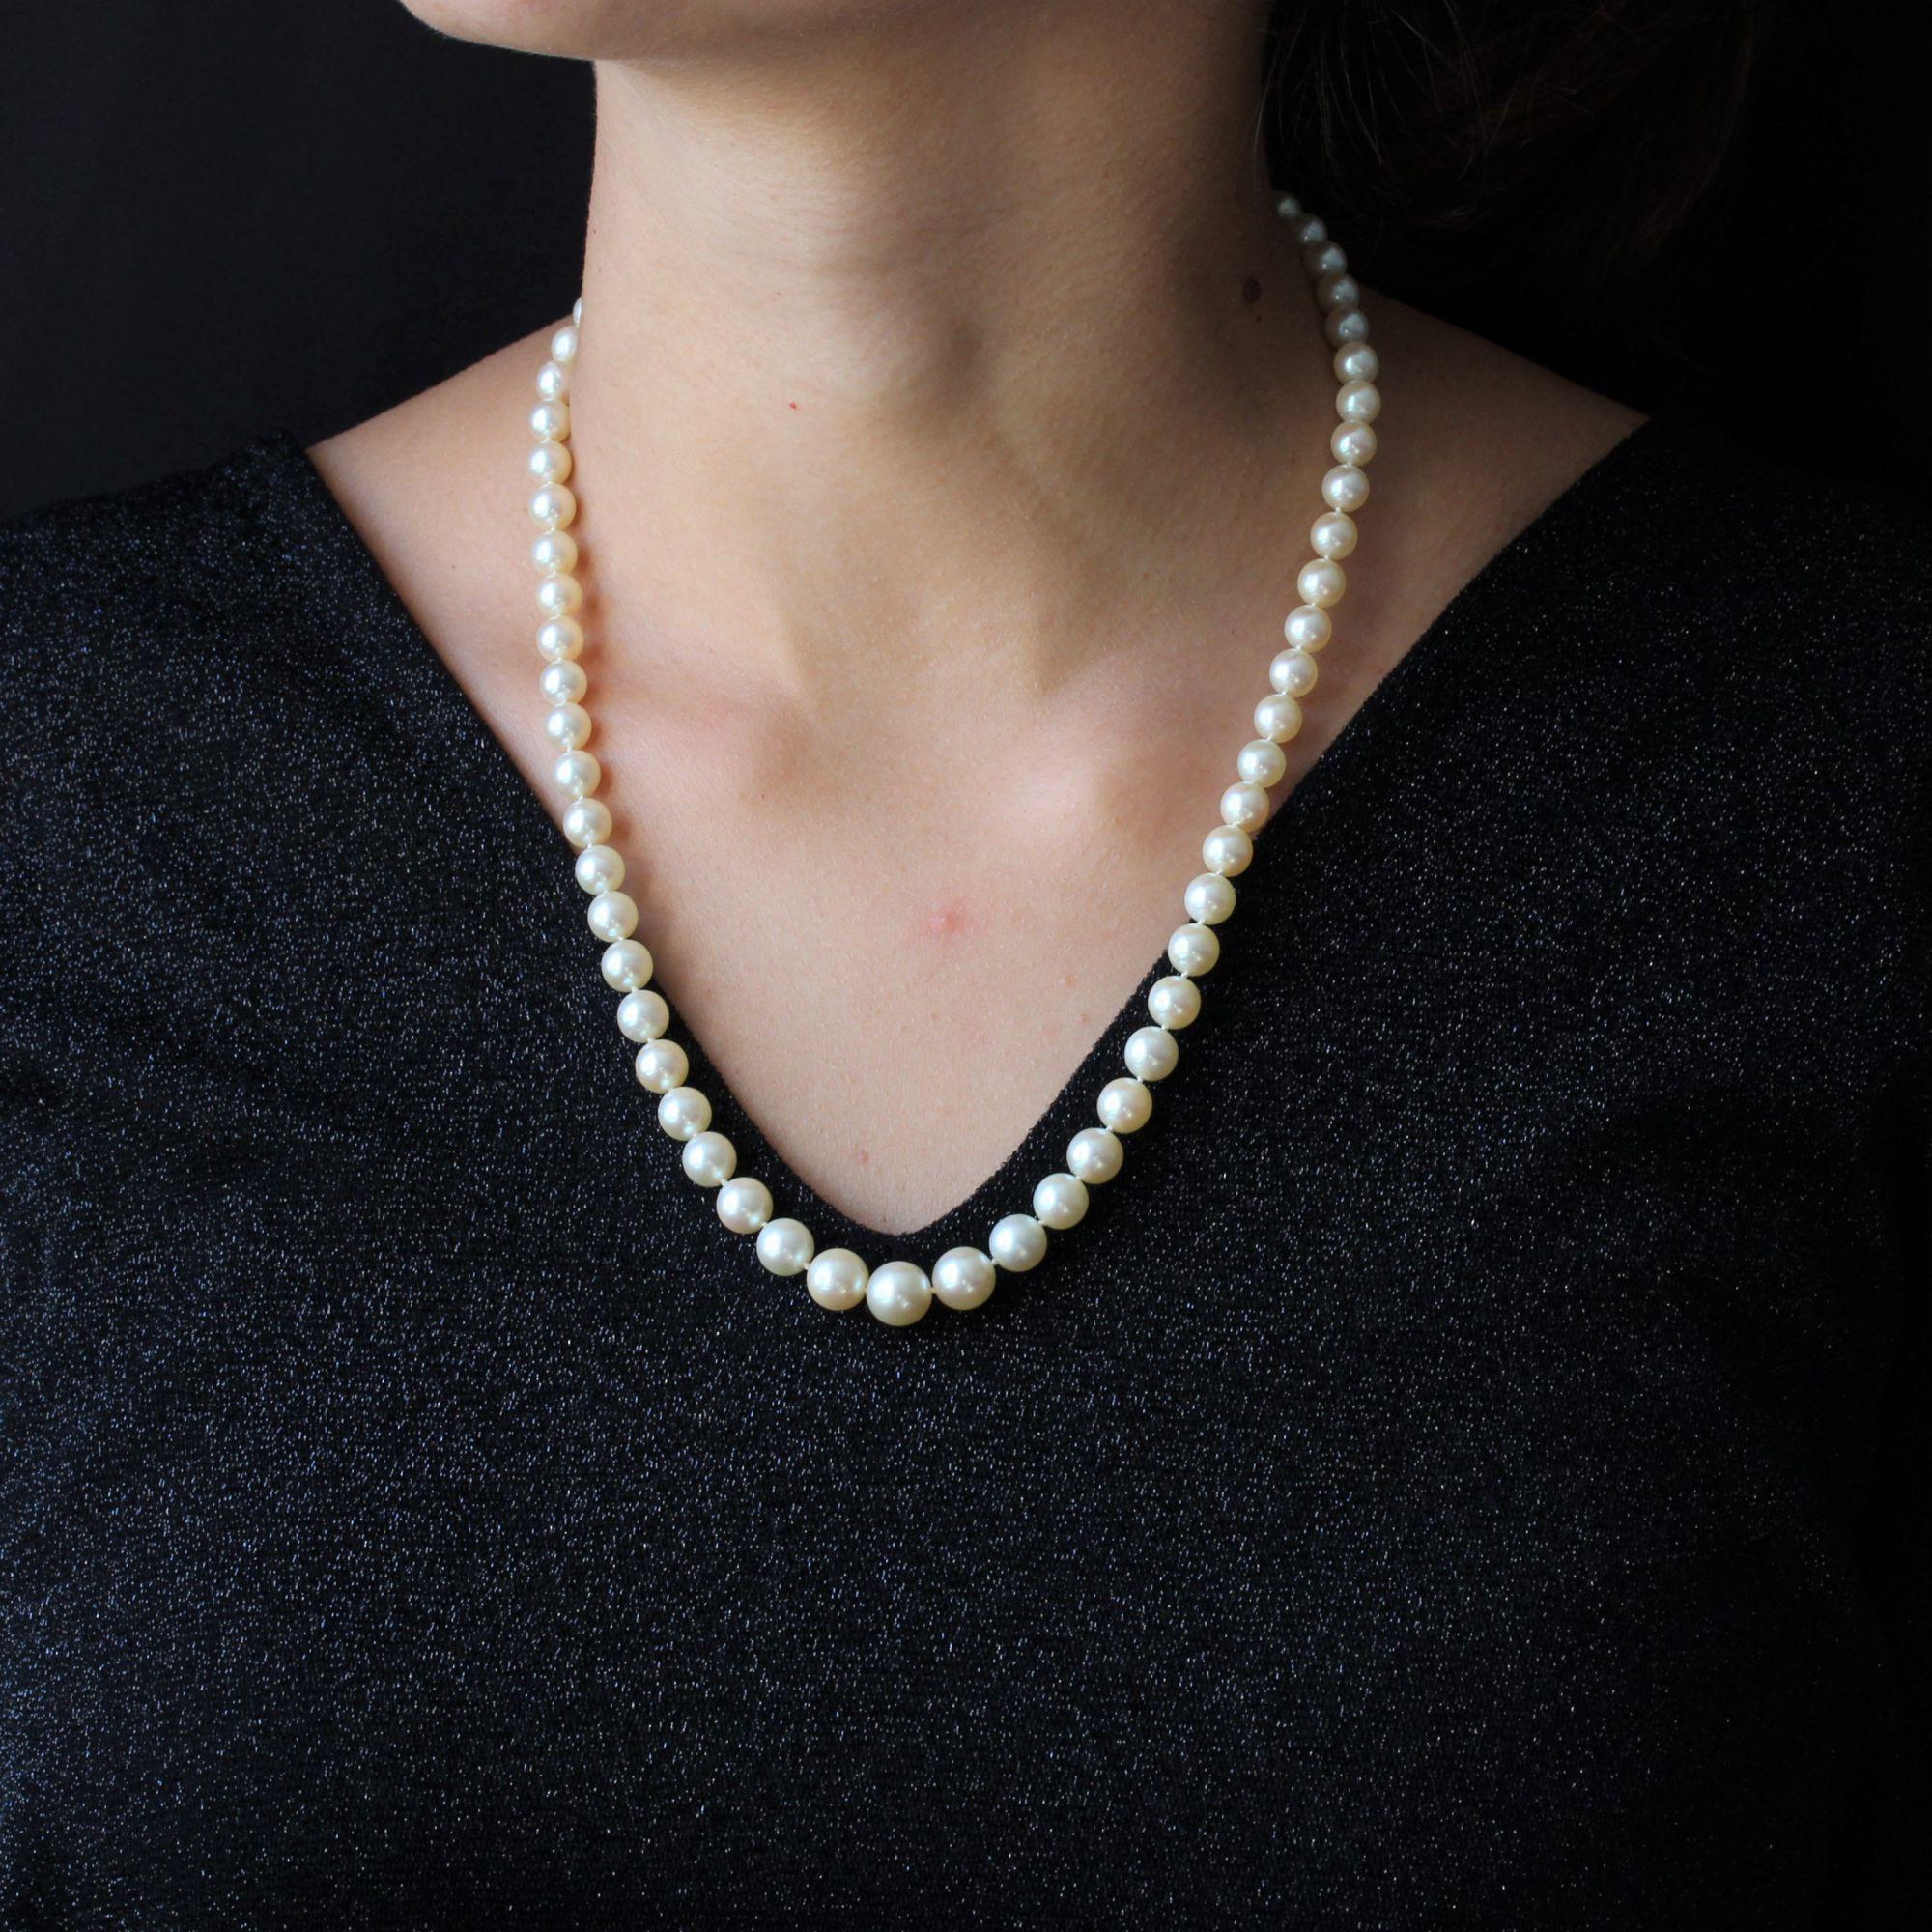 Necklace of cultured pearls falling with nuanced white orient. It presents a clasp in 18 karat yellow gold, eagle head hallmark, made of gold twists and set with 4 diamonds 8/8- cut and 3 round emeralds, the last one being on the push button.
The